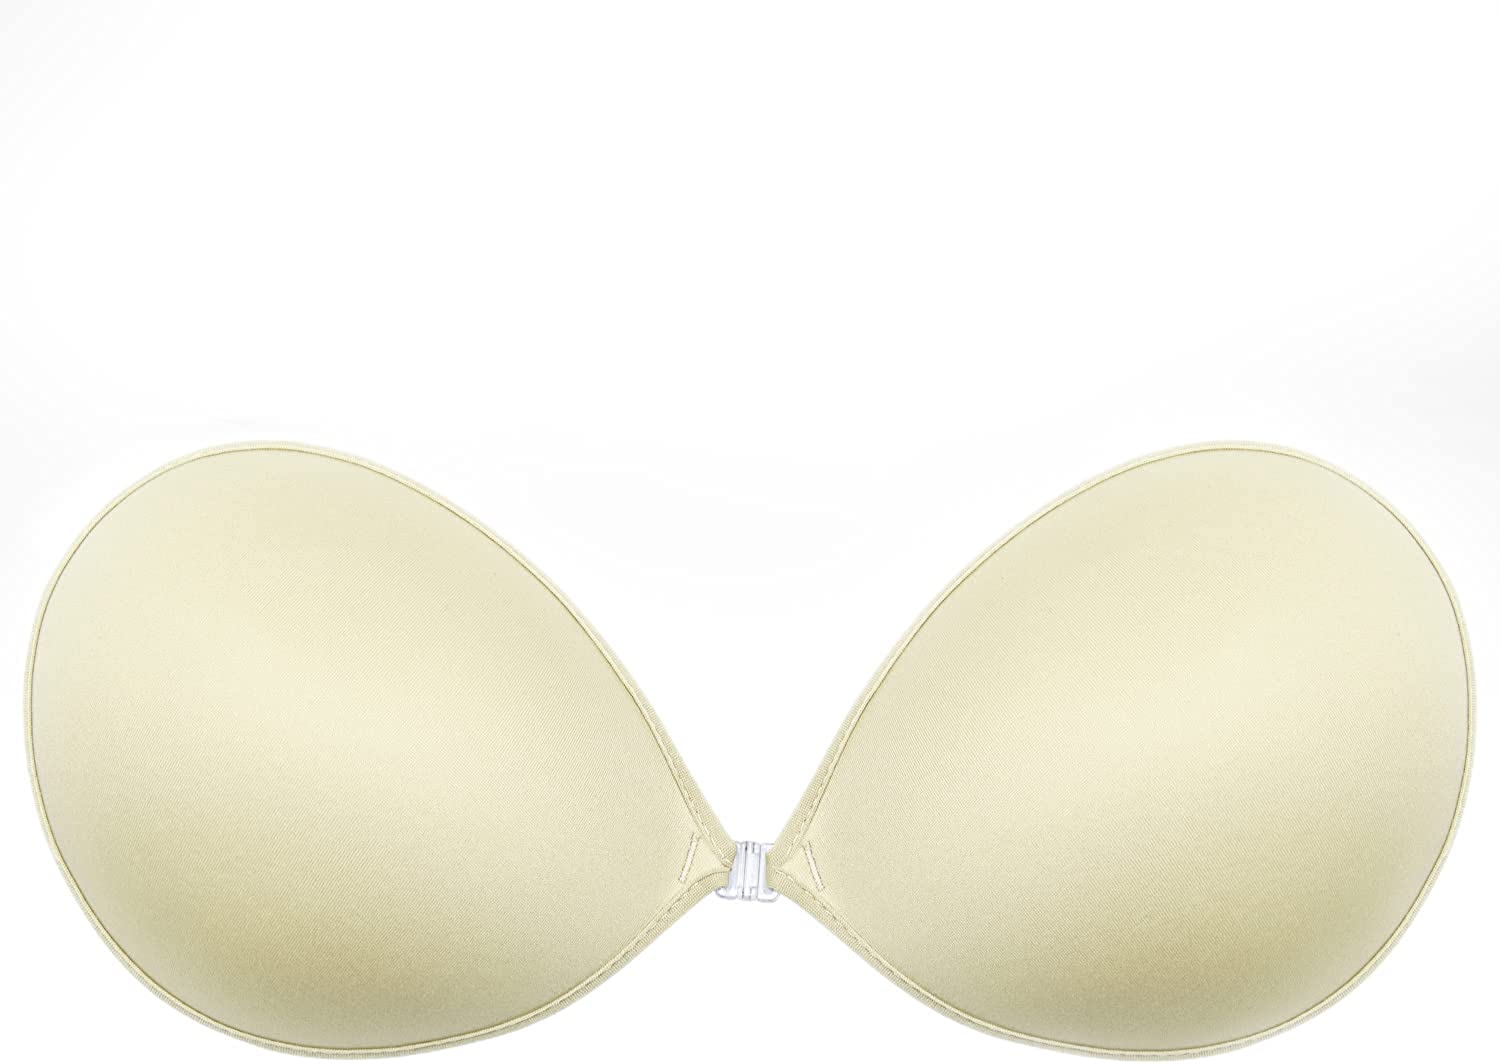 Adhesive Push-up Reusable Self Silicone Bra Invisible Sticky Bra – WingsLove